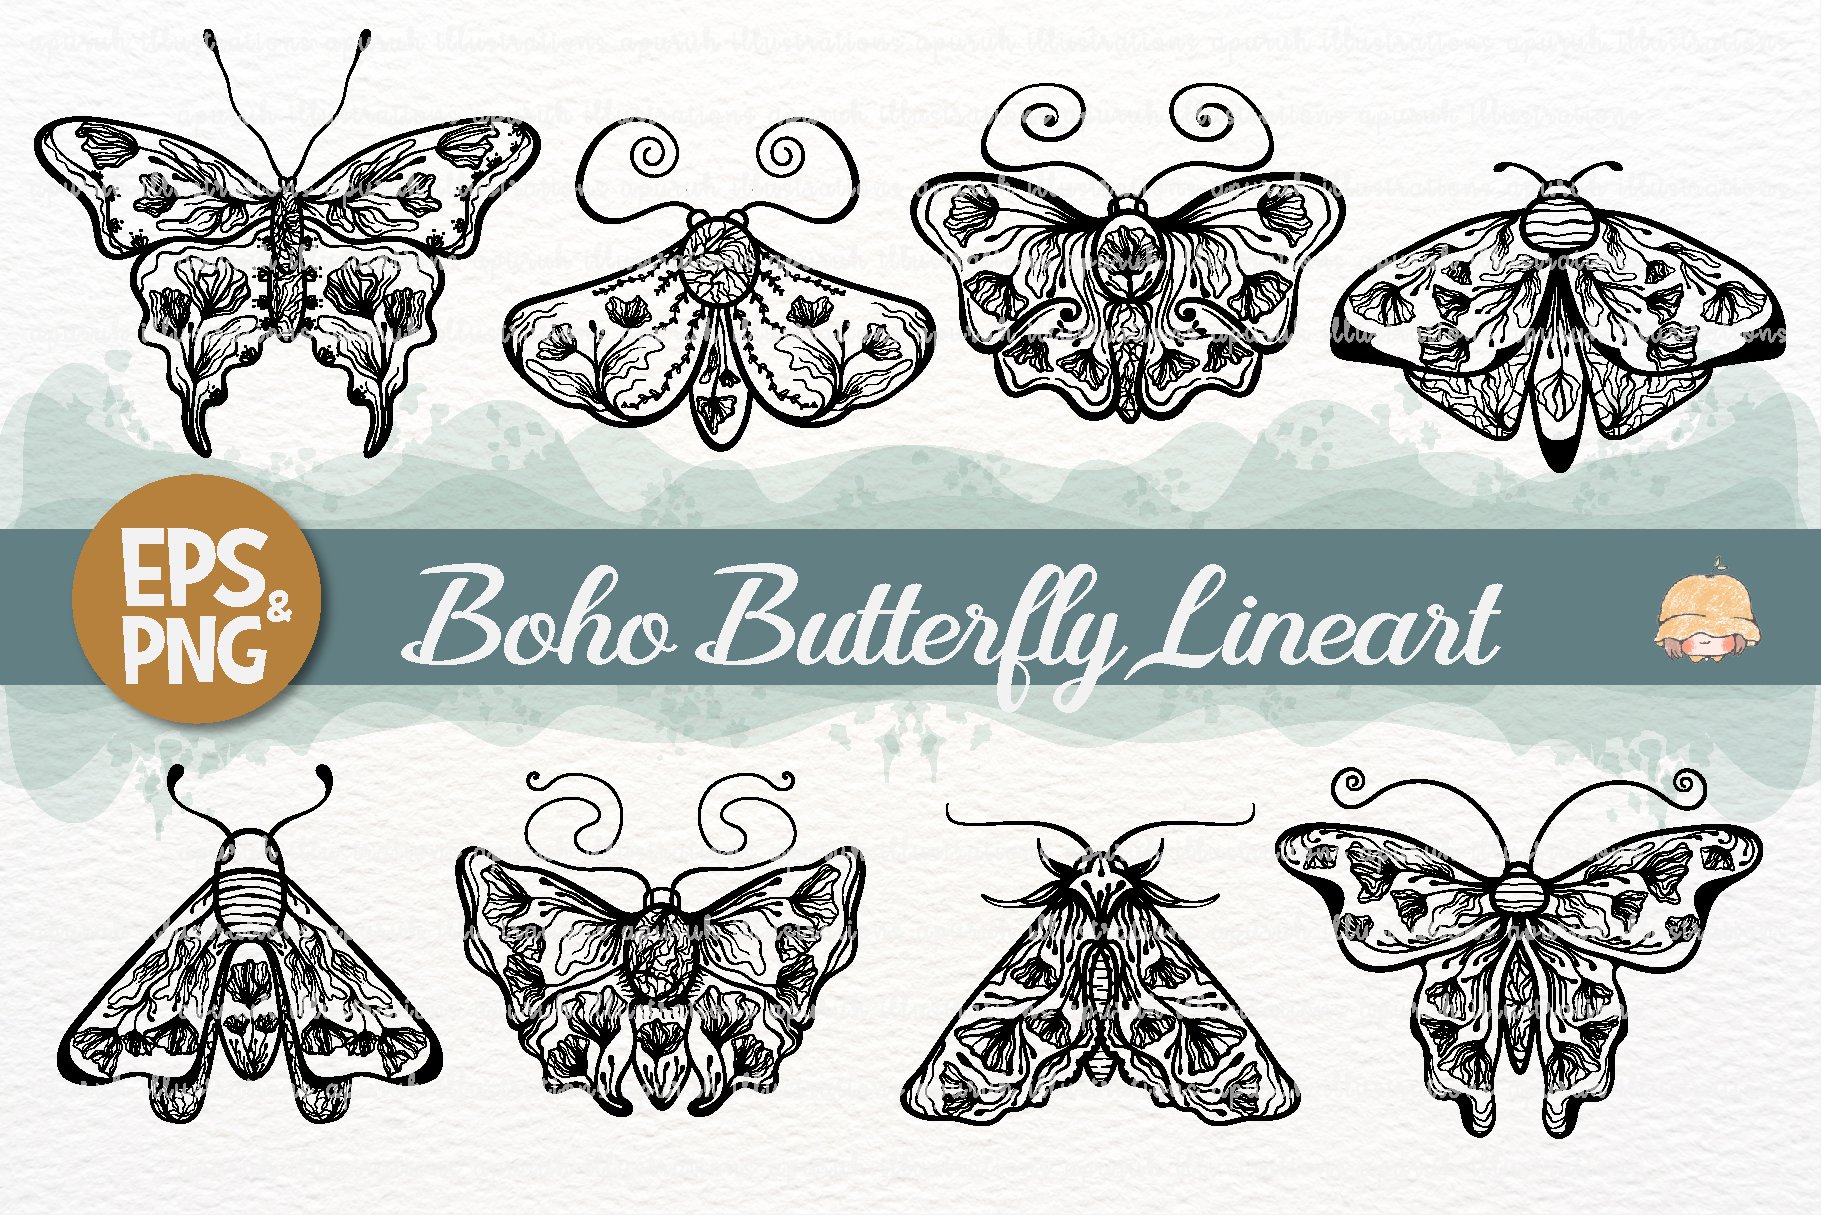 Boho Butterfly Moth Insect Lineart cover image.